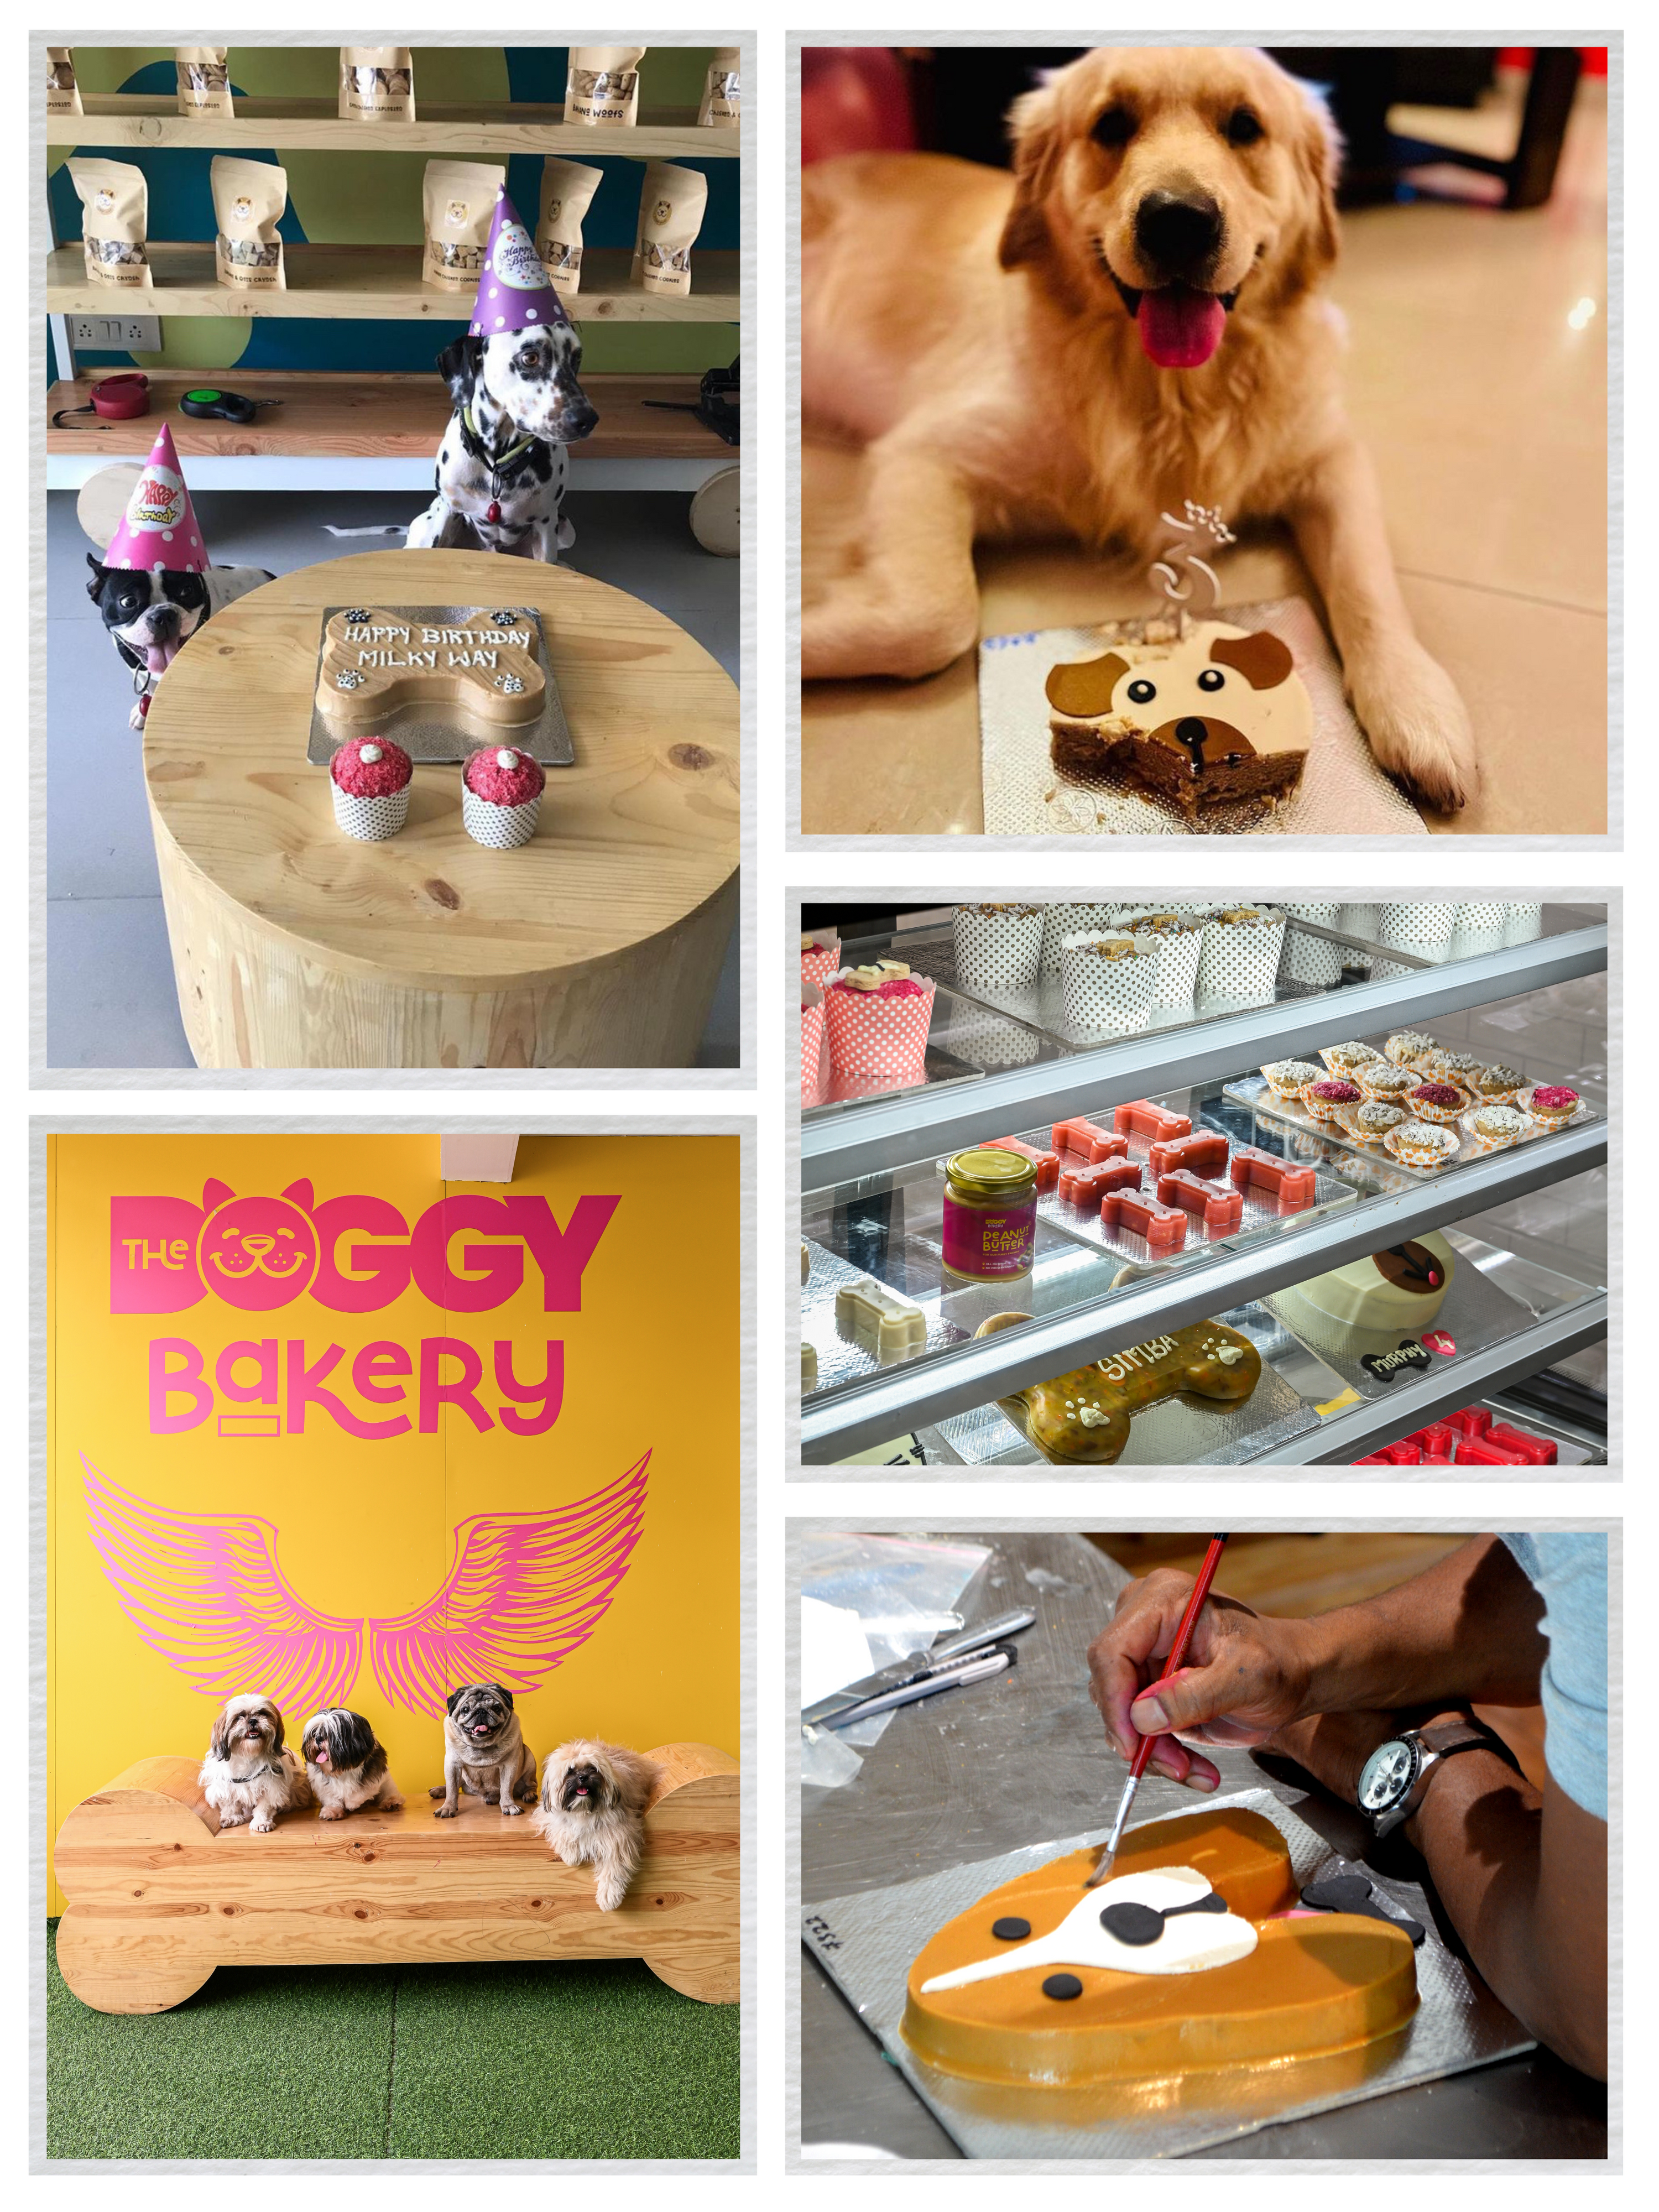 Collage of dogs enjoying treats. The collage features different breeds of dogs, all of whom are smiling and wagging their tails. Some of the dogs are licking their lips, while others are holding treats in their mouths. The collage is a celebration of dogs' love of food and their joy in life.